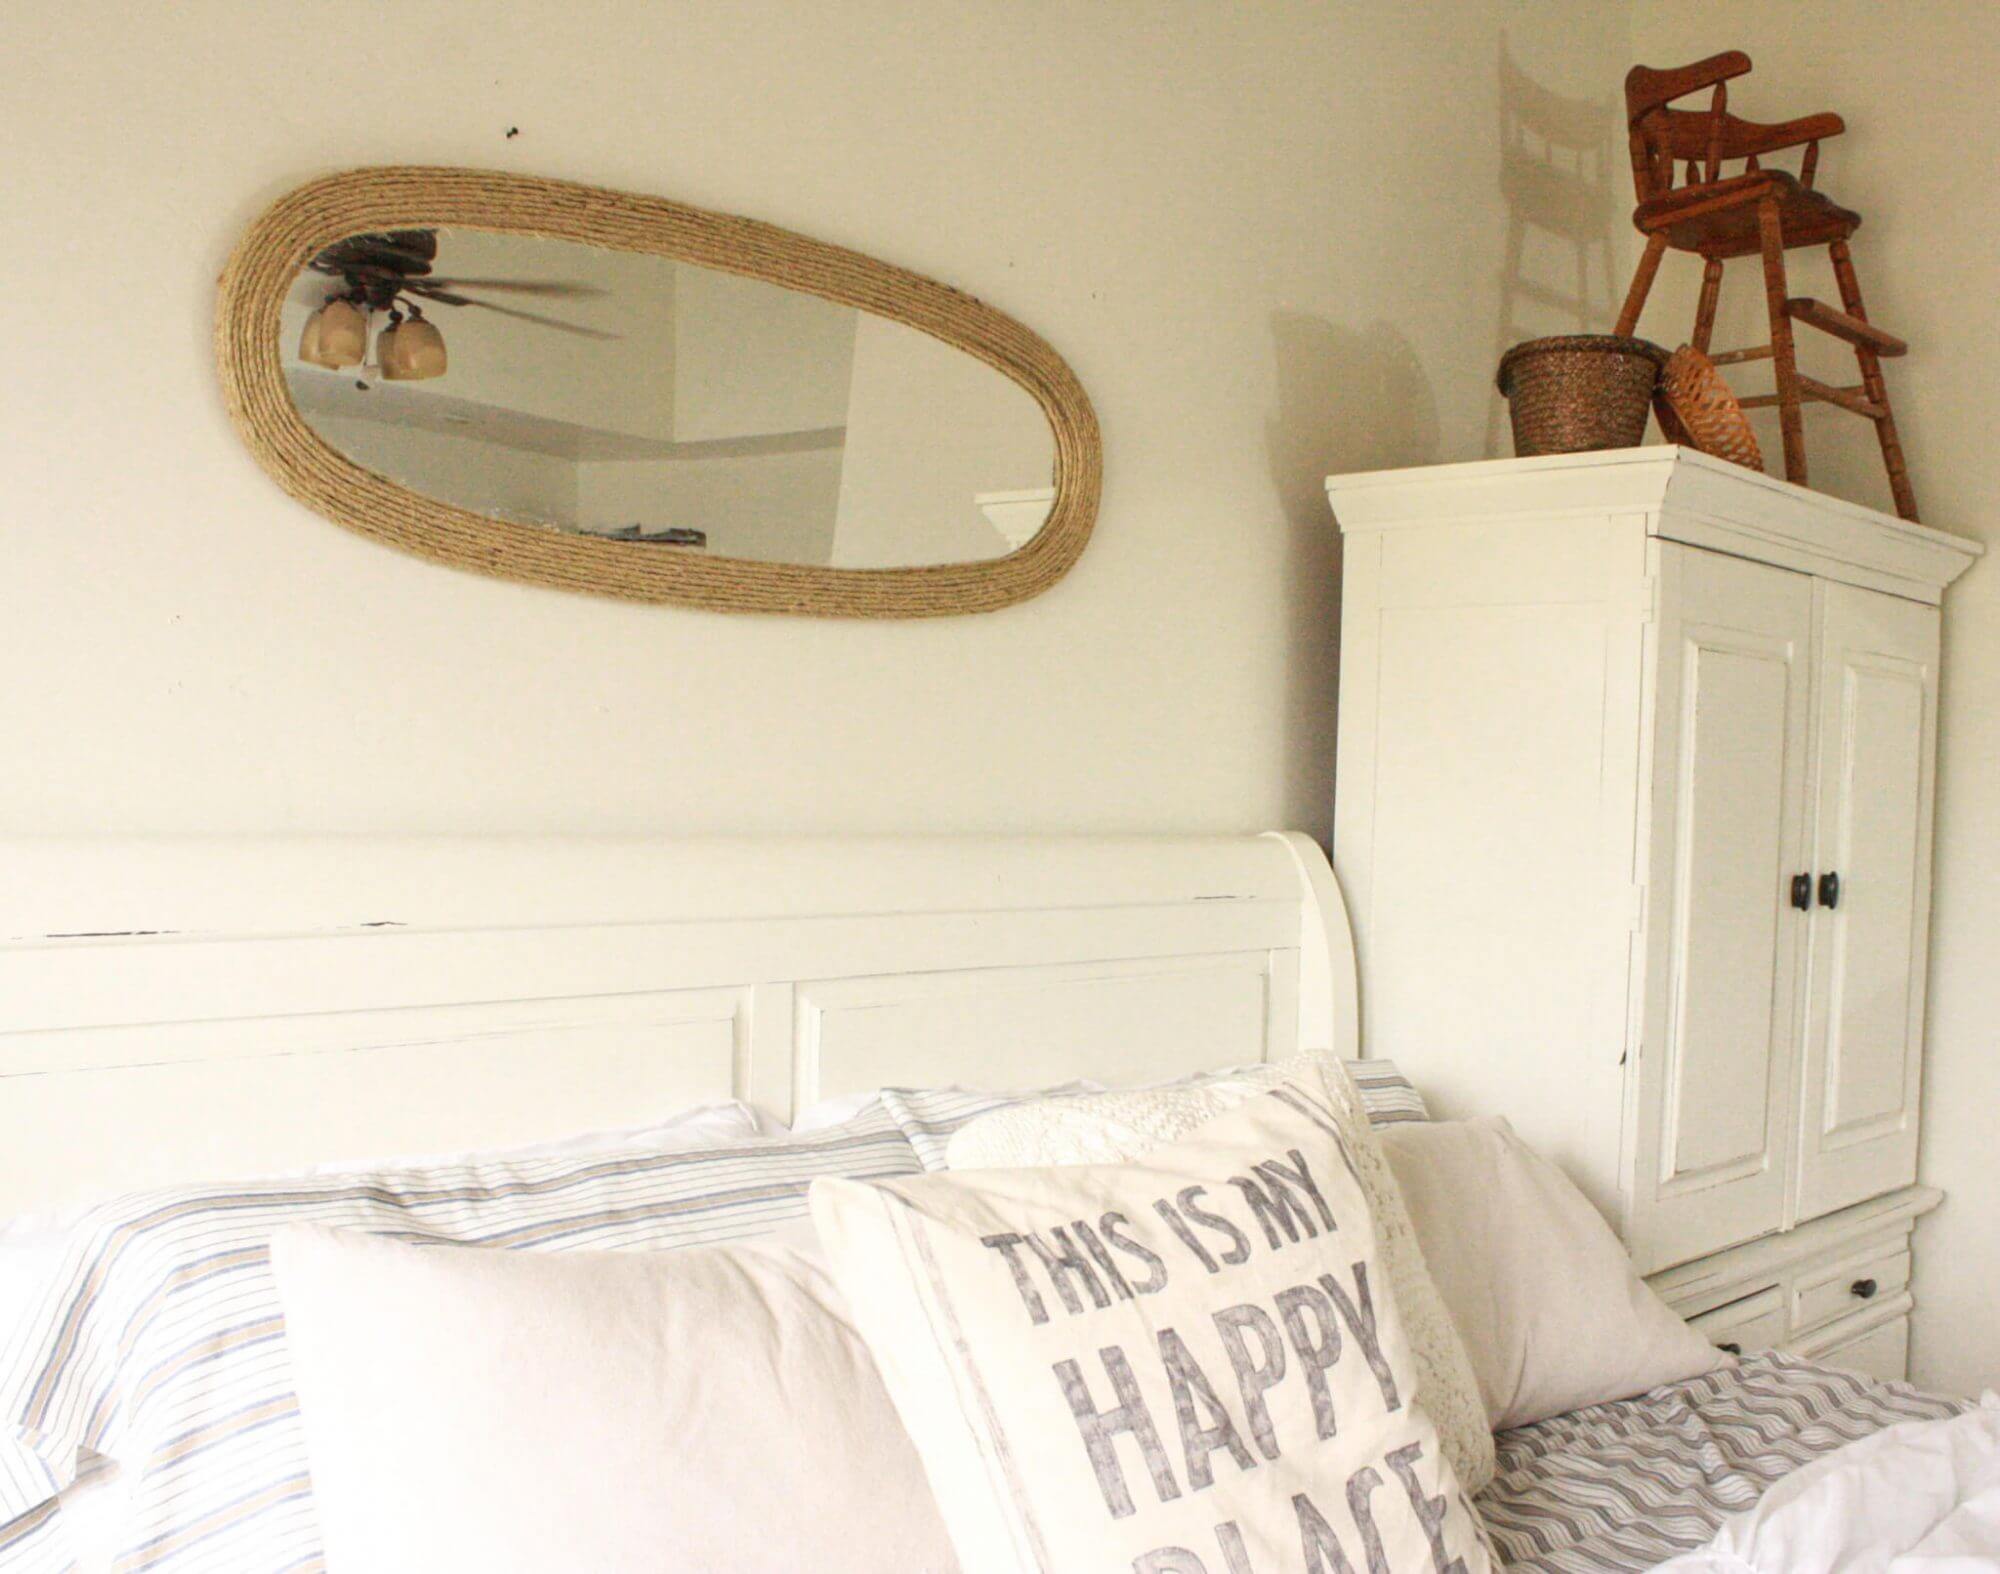 This thrift store mirror makeover is a great update to an otherwise drab and boring mirror. The perfect farmhouse accent. | Twelveonmain.com